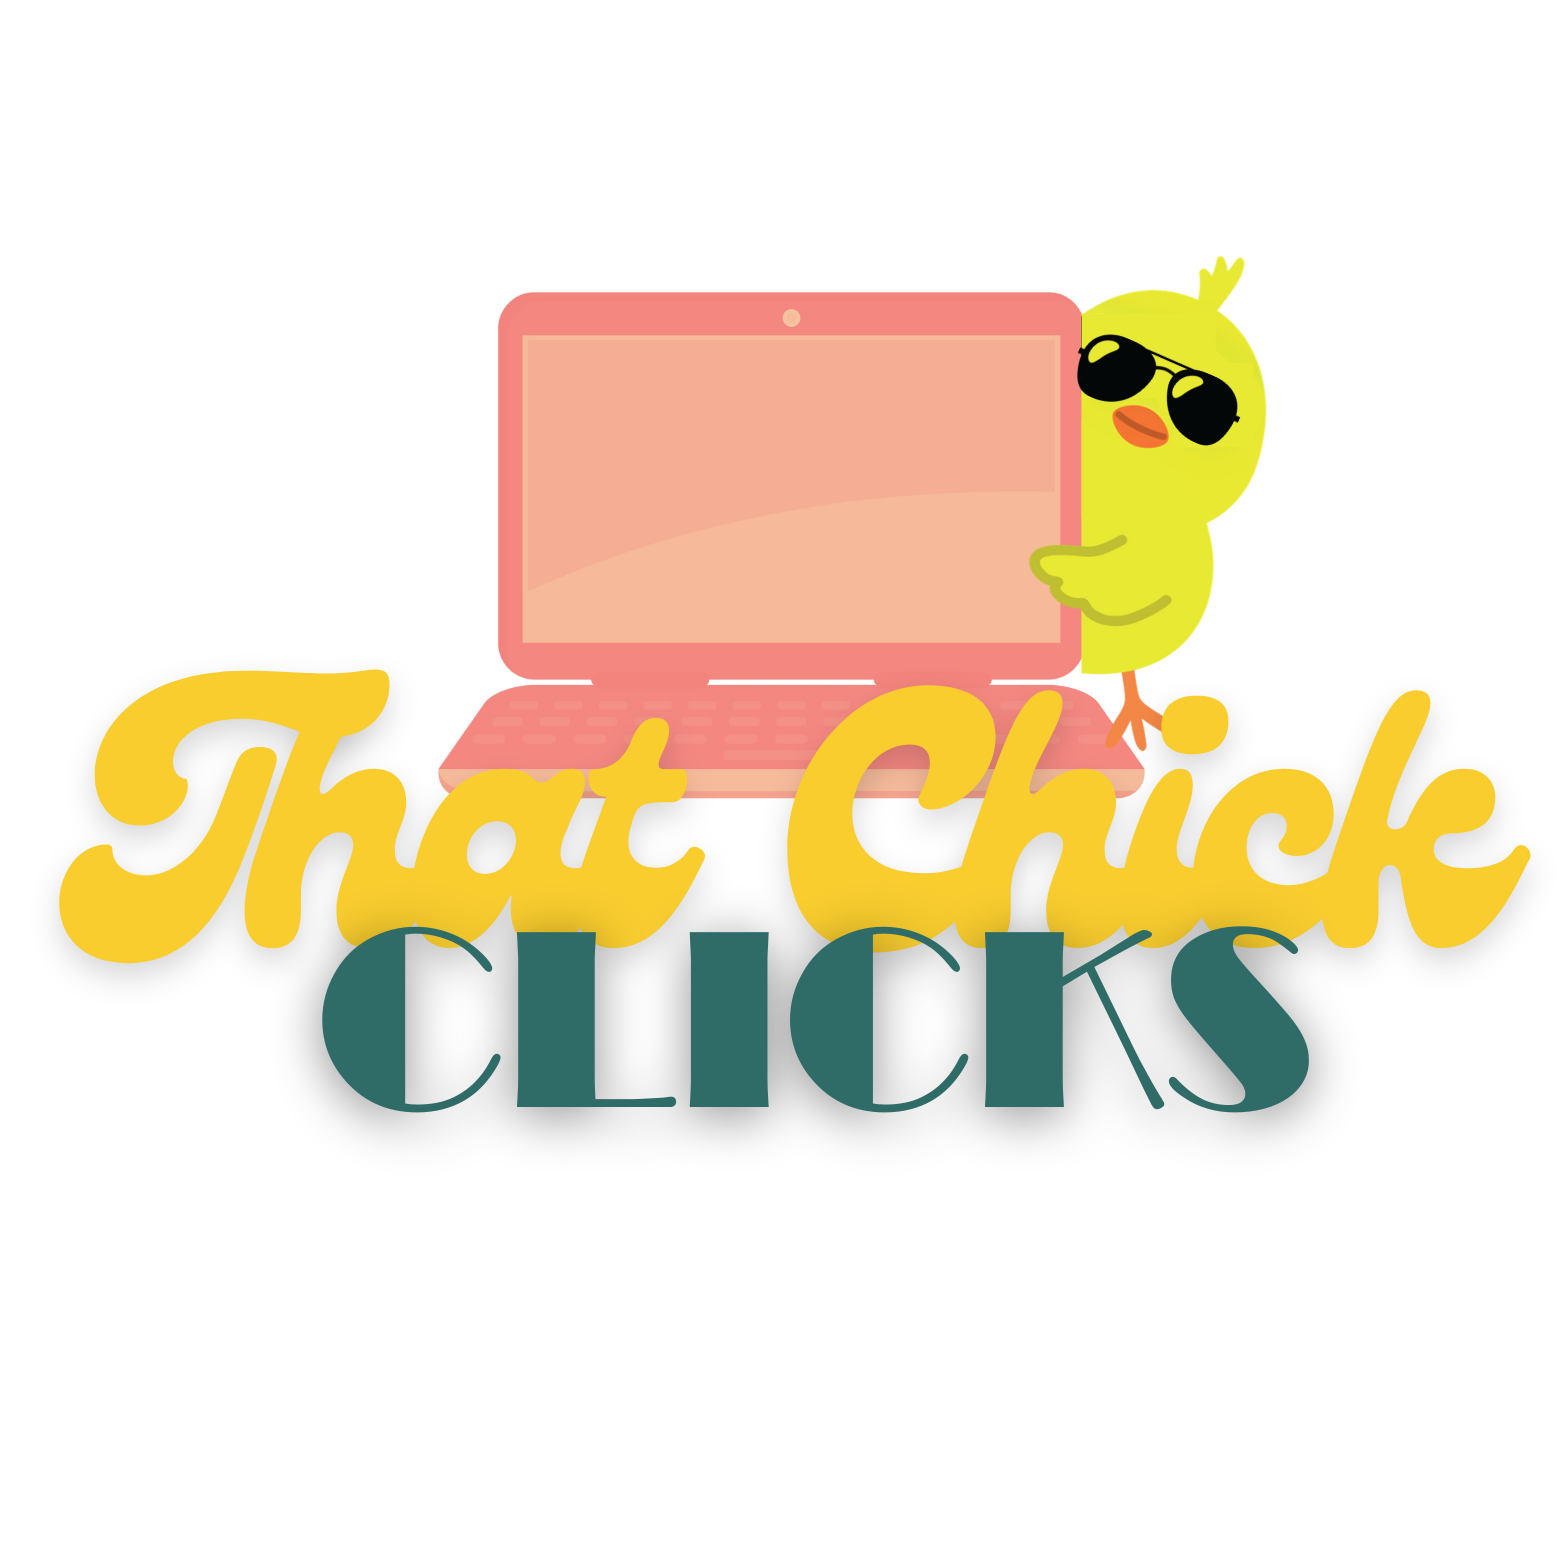 That Chick Clicks